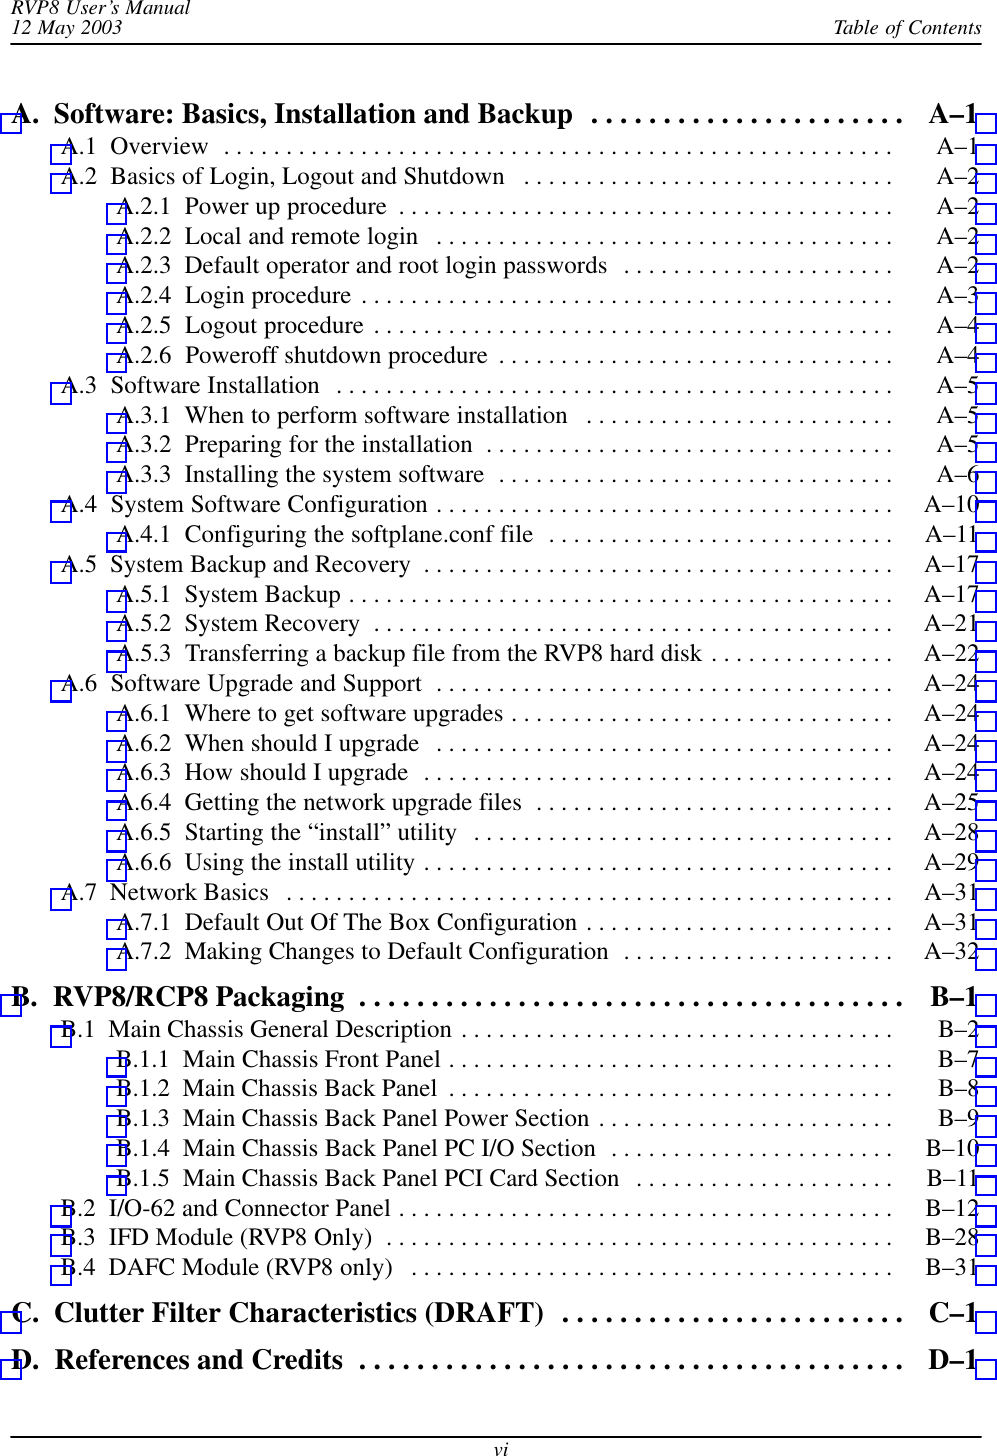 Table of ContentsRVP8 User’s Manual12 May 2003viA.  Software: Basics, Installation and Backup A–1 . . . . . . . . . . . . . . . . . . . . . . A.1  Overview A–1 . . . . . . . . . . . . . . . . . . . . . . . . . . . . . . . . . . . . . . . . . . . . . . . . . . . . . . A.2  Basics of Login, Logout and Shutdown A–2 . . . . . . . . . . . . . . . . . . . . . . . . . . . . . . A.2.1  Power up procedure A–2 . . . . . . . . . . . . . . . . . . . . . . . . . . . . . . . . . . . . . . . . A.2.2  Local and remote login A–2 . . . . . . . . . . . . . . . . . . . . . . . . . . . . . . . . . . . . . A.2.3  Default operator and root login passwords A–2 . . . . . . . . . . . . . . . . . . . . . . A.2.4  Login procedure A–3 . . . . . . . . . . . . . . . . . . . . . . . . . . . . . . . . . . . . . . . . . . . A.2.5  Logout procedure A–4 . . . . . . . . . . . . . . . . . . . . . . . . . . . . . . . . . . . . . . . . . . A.2.6  Poweroff shutdown procedure A–4 . . . . . . . . . . . . . . . . . . . . . . . . . . . . . . . . A.3  Software Installation A–5 . . . . . . . . . . . . . . . . . . . . . . . . . . . . . . . . . . . . . . . . . . . . . A.3.1  When to perform software installation A–5 . . . . . . . . . . . . . . . . . . . . . . . . . A.3.2  Preparing for the installation A–5 . . . . . . . . . . . . . . . . . . . . . . . . . . . . . . . . . A.3.3  Installing the system software A–6 . . . . . . . . . . . . . . . . . . . . . . . . . . . . . . . . A.4  System Software Configuration A–10 . . . . . . . . . . . . . . . . . . . . . . . . . . . . . . . . . . . . . A.4.1  Configuring the softplane.conf file A–11 . . . . . . . . . . . . . . . . . . . . . . . . . . . . A.5  System Backup and Recovery A–17 . . . . . . . . . . . . . . . . . . . . . . . . . . . . . . . . . . . . . . A.5.1  System Backup A–17 . . . . . . . . . . . . . . . . . . . . . . . . . . . . . . . . . . . . . . . . . . . . A.5.2  System Recovery A–21 . . . . . . . . . . . . . . . . . . . . . . . . . . . . . . . . . . . . . . . . . . A.5.3  Transferring a backup file from the RVP8 hard disk A–22 . . . . . . . . . . . . . . . A.6  Software Upgrade and Support A–24 . . . . . . . . . . . . . . . . . . . . . . . . . . . . . . . . . . . . . A.6.1  Where to get software upgrades A–24 . . . . . . . . . . . . . . . . . . . . . . . . . . . . . . . A.6.2  When should I upgrade A–24 . . . . . . . . . . . . . . . . . . . . . . . . . . . . . . . . . . . . . A.6.3  How should I upgrade A–24 . . . . . . . . . . . . . . . . . . . . . . . . . . . . . . . . . . . . . . A.6.4  Getting the network upgrade files A–25 . . . . . . . . . . . . . . . . . . . . . . . . . . . . . A.6.5  Starting the “install” utility A–28 . . . . . . . . . . . . . . . . . . . . . . . . . . . . . . . . . . A.6.6  Using the install utility A–29 . . . . . . . . . . . . . . . . . . . . . . . . . . . . . . . . . . . . . . A.7  Network Basics A–31 . . . . . . . . . . . . . . . . . . . . . . . . . . . . . . . . . . . . . . . . . . . . . . . . . A.7.1  Default Out Of The Box Configuration A–31 . . . . . . . . . . . . . . . . . . . . . . . . . A.7.2  Making Changes to Default Configuration A–32 . . . . . . . . . . . . . . . . . . . . . . B.  RVP8/RCP8 Packaging B–1 . . . . . . . . . . . . . . . . . . . . . . . . . . . . . . . . . . . . . . B.1  Main Chassis General Description B–2 . . . . . . . . . . . . . . . . . . . . . . . . . . . . . . . . . . . B.1.1  Main Chassis Front Panel B–7 . . . . . . . . . . . . . . . . . . . . . . . . . . . . . . . . . . . . B.1.2  Main Chassis Back Panel B–8 . . . . . . . . . . . . . . . . . . . . . . . . . . . . . . . . . . . . B.1.3  Main Chassis Back Panel Power Section B–9 . . . . . . . . . . . . . . . . . . . . . . . . B.1.4  Main Chassis Back Panel PC I/O Section B–10 . . . . . . . . . . . . . . . . . . . . . . . B.1.5  Main Chassis Back Panel PCI Card Section B–11 . . . . . . . . . . . . . . . . . . . . . B.2  I/O-62 and Connector Panel B–12 . . . . . . . . . . . . . . . . . . . . . . . . . . . . . . . . . . . . . . . . B.3  IFD Module (RVP8 Only) B–28 . . . . . . . . . . . . . . . . . . . . . . . . . . . . . . . . . . . . . . . . . B.4  DAFC Module (RVP8 only) B–31 . . . . . . . . . . . . . . . . . . . . . . . . . . . . . . . . . . . . . . . C.  Clutter Filter Characteristics (DRAFT) C–1 . . . . . . . . . . . . . . . . . . . . . . . . D.  References and Credits D–1 . . . . . . . . . . . . . . . . . . . . . . . . . . . . . . . . . . . . . . 